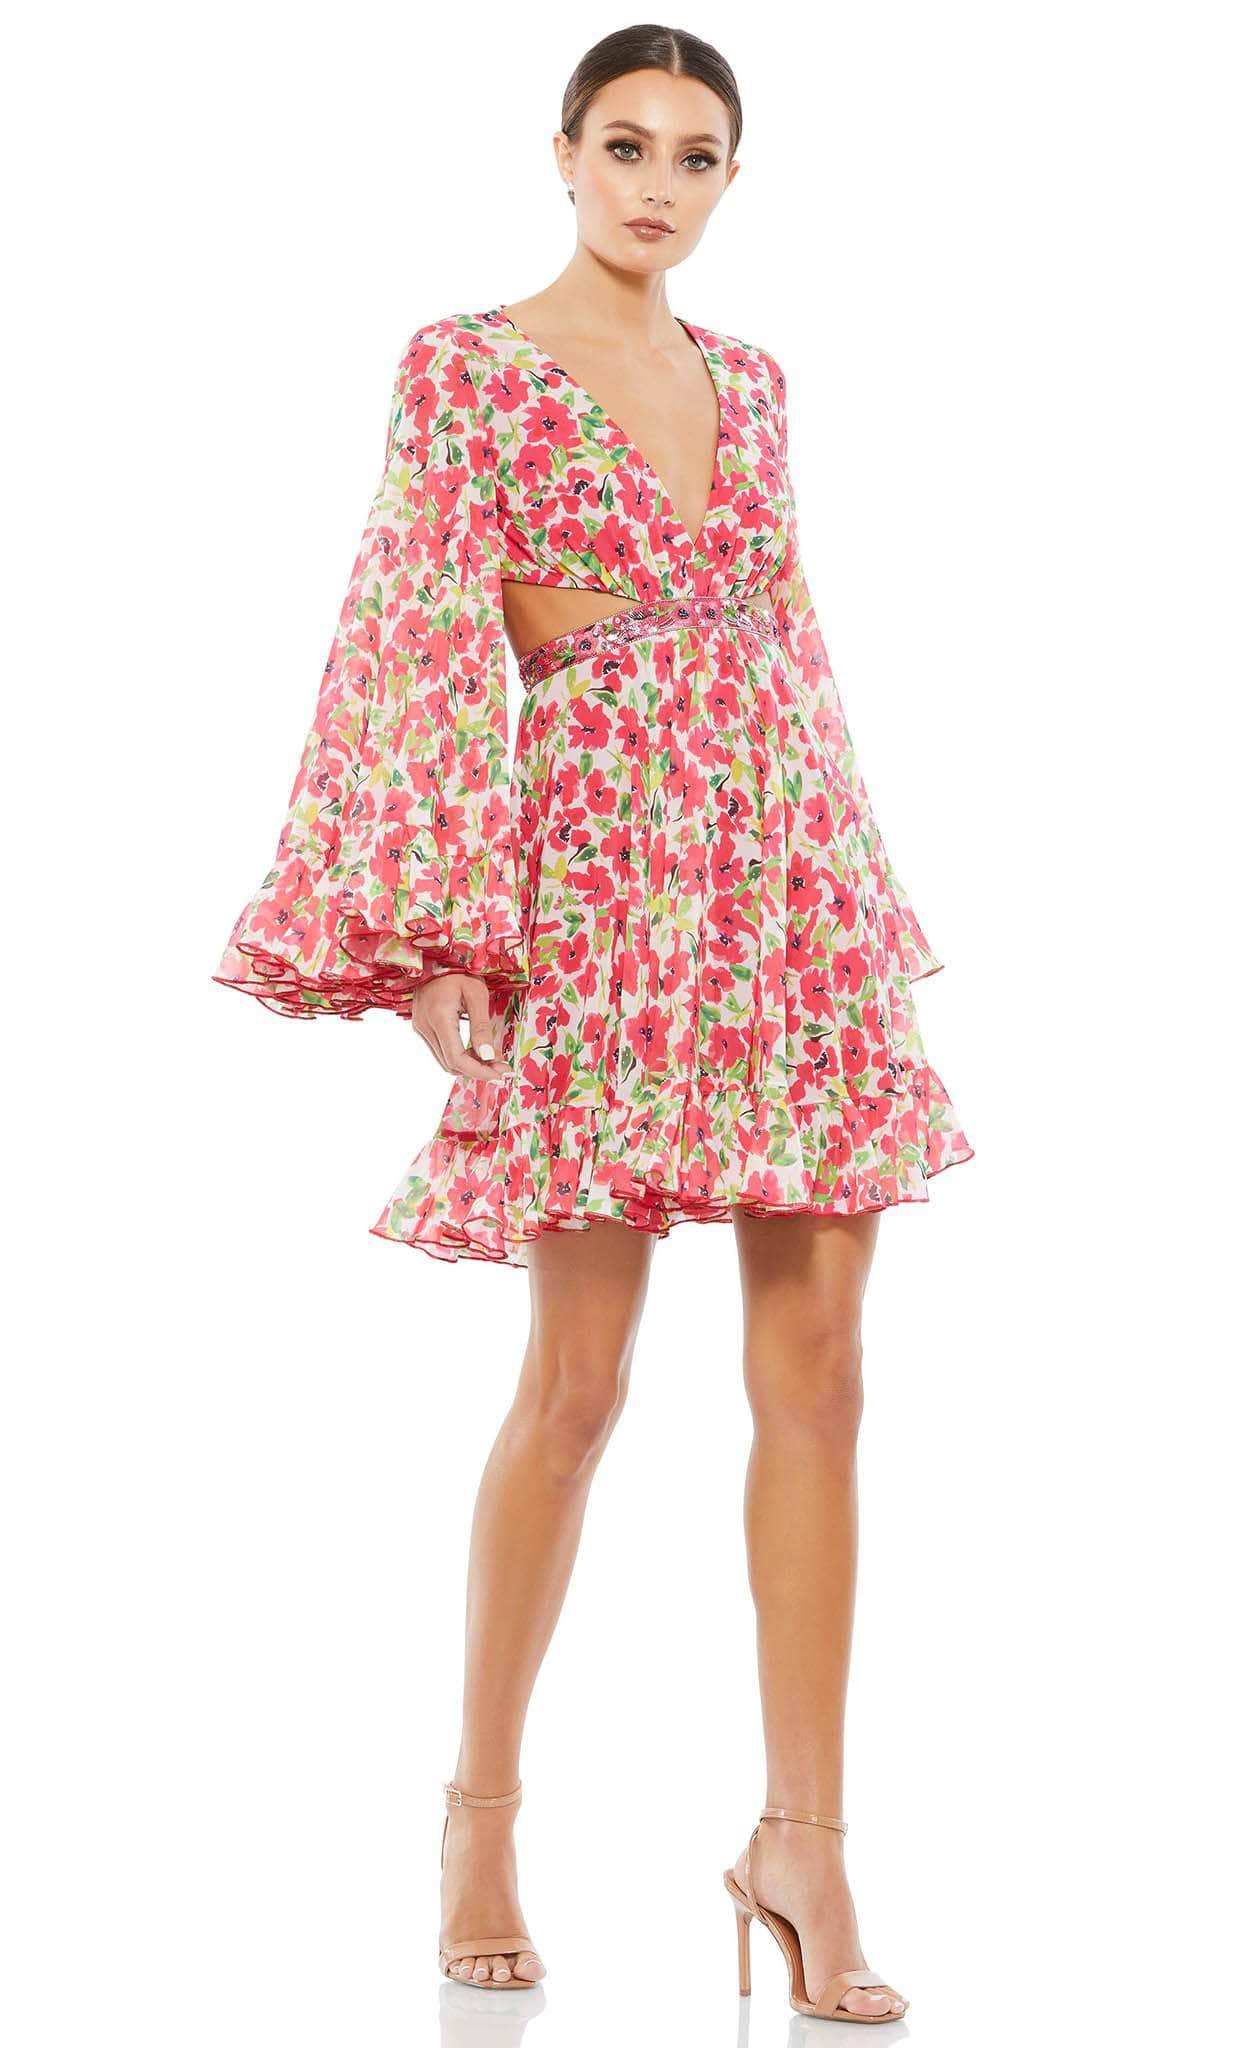 Ieena Duggal 9158 - Floral Printed Short Bell Dress Special Occasion Dress 0 / Pink Multi